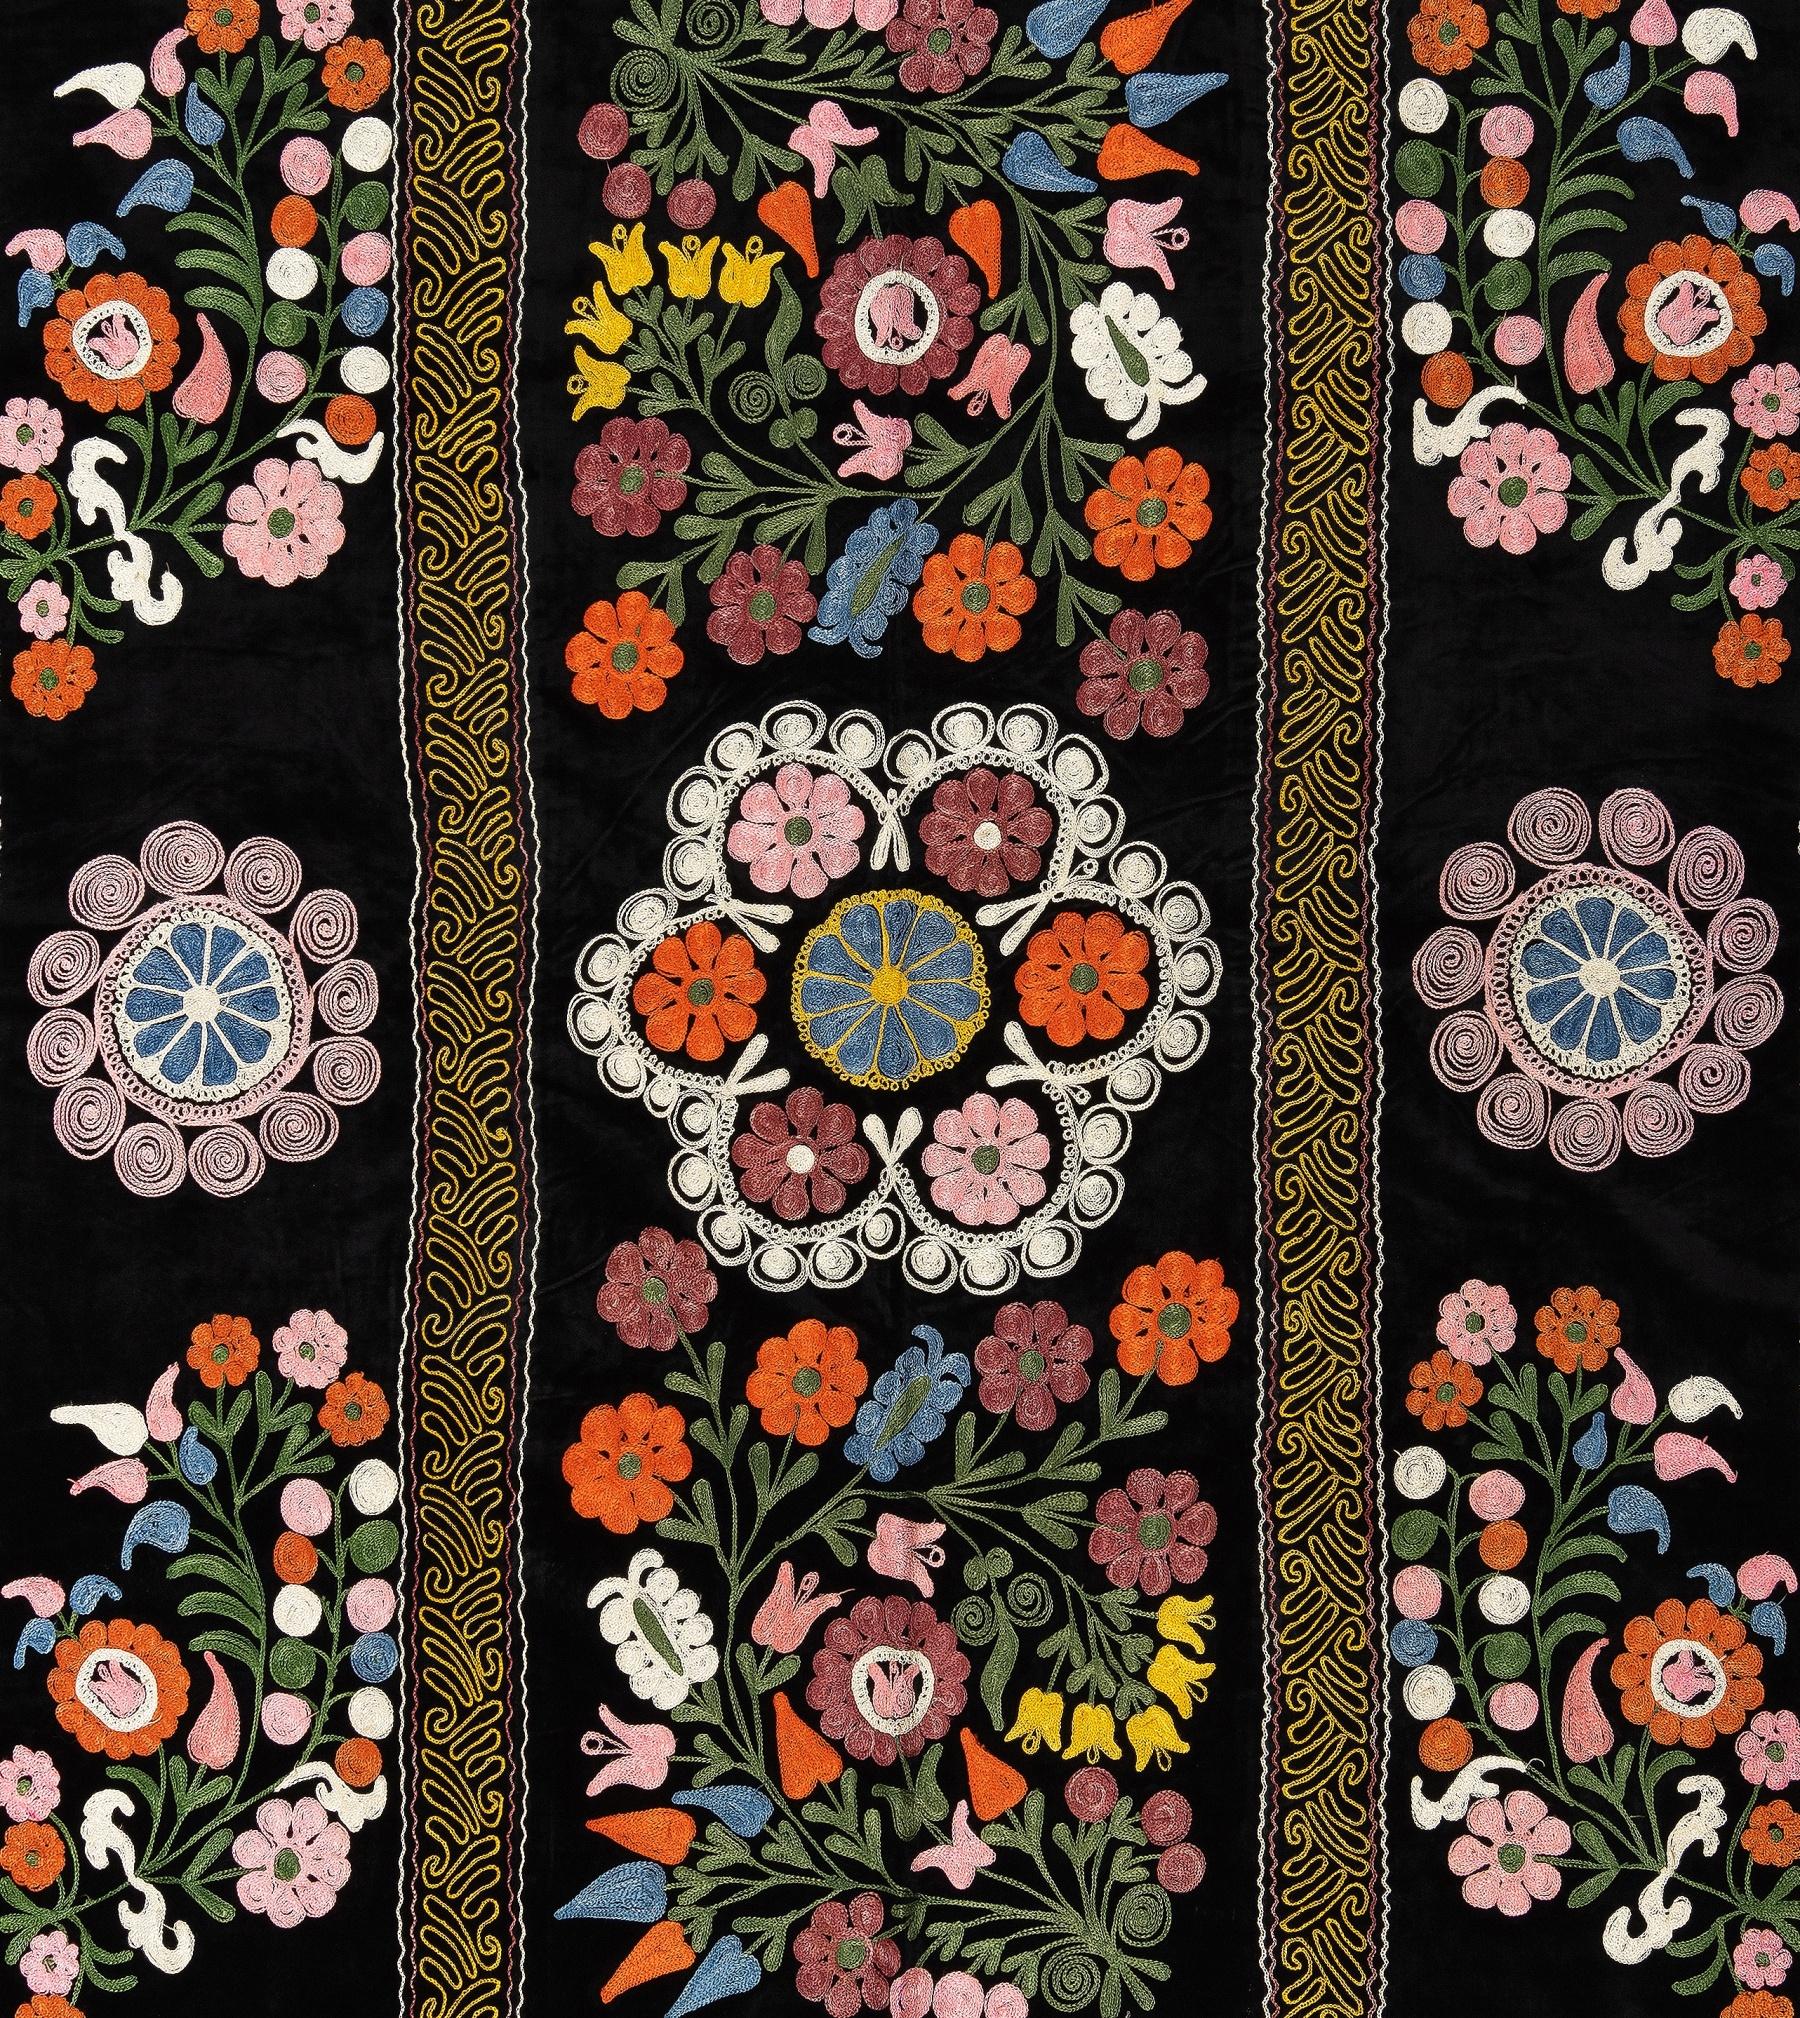 Uzbek 4.3x6.8 Ft Vintage Silk Embroidery Bed Cover, Asian Suzani Wall Hanging in Black For Sale